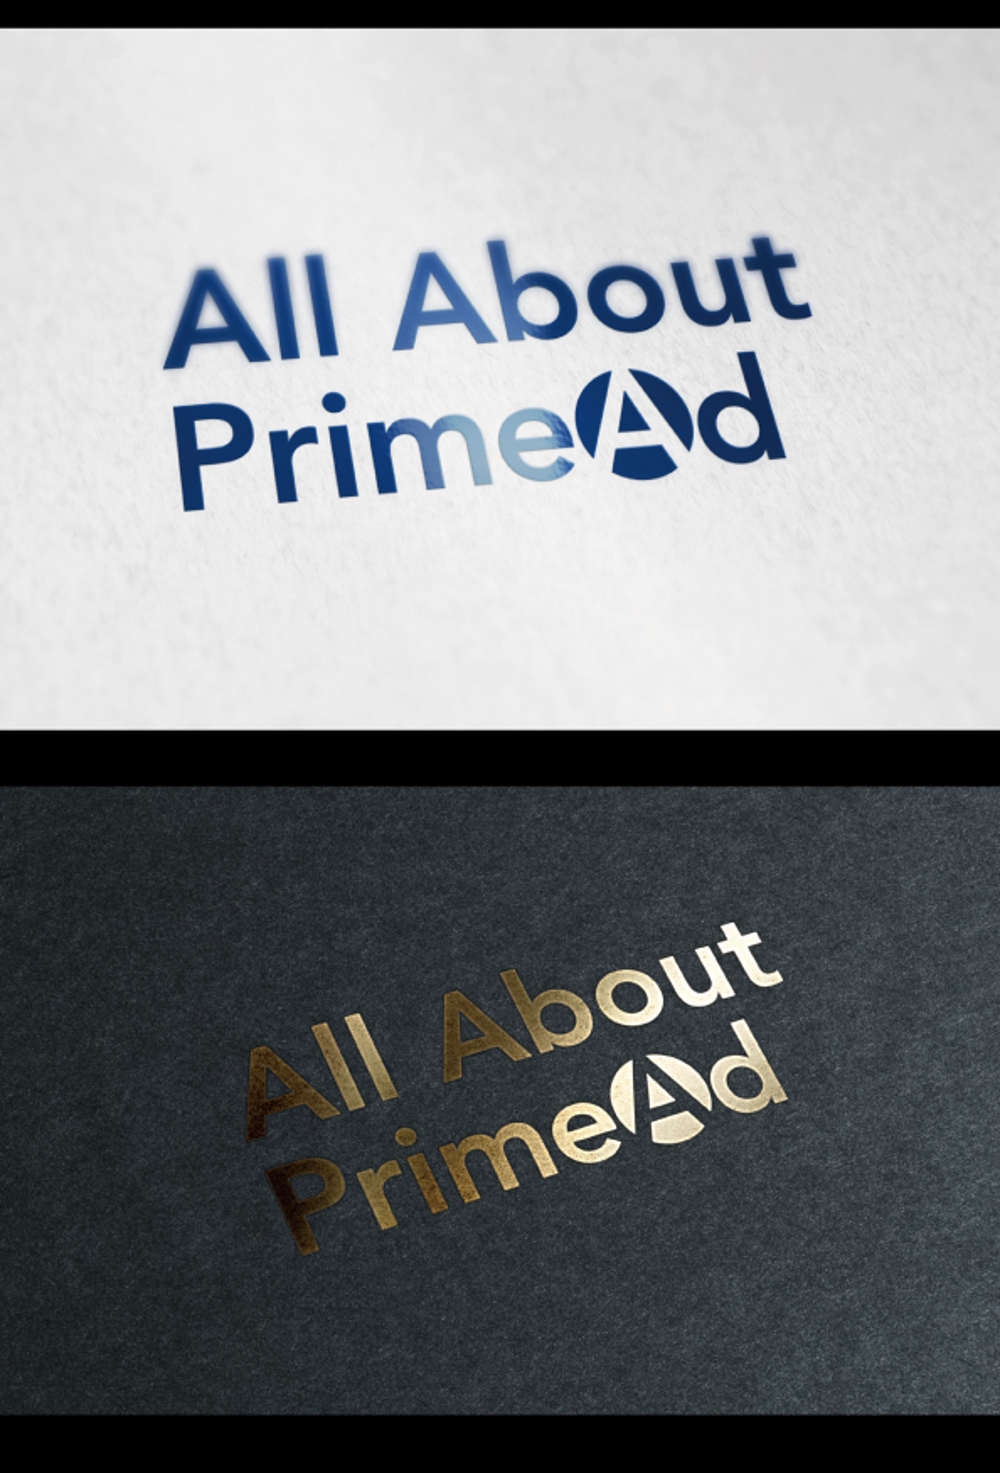 All-About-PrimeAdさま４.jpg